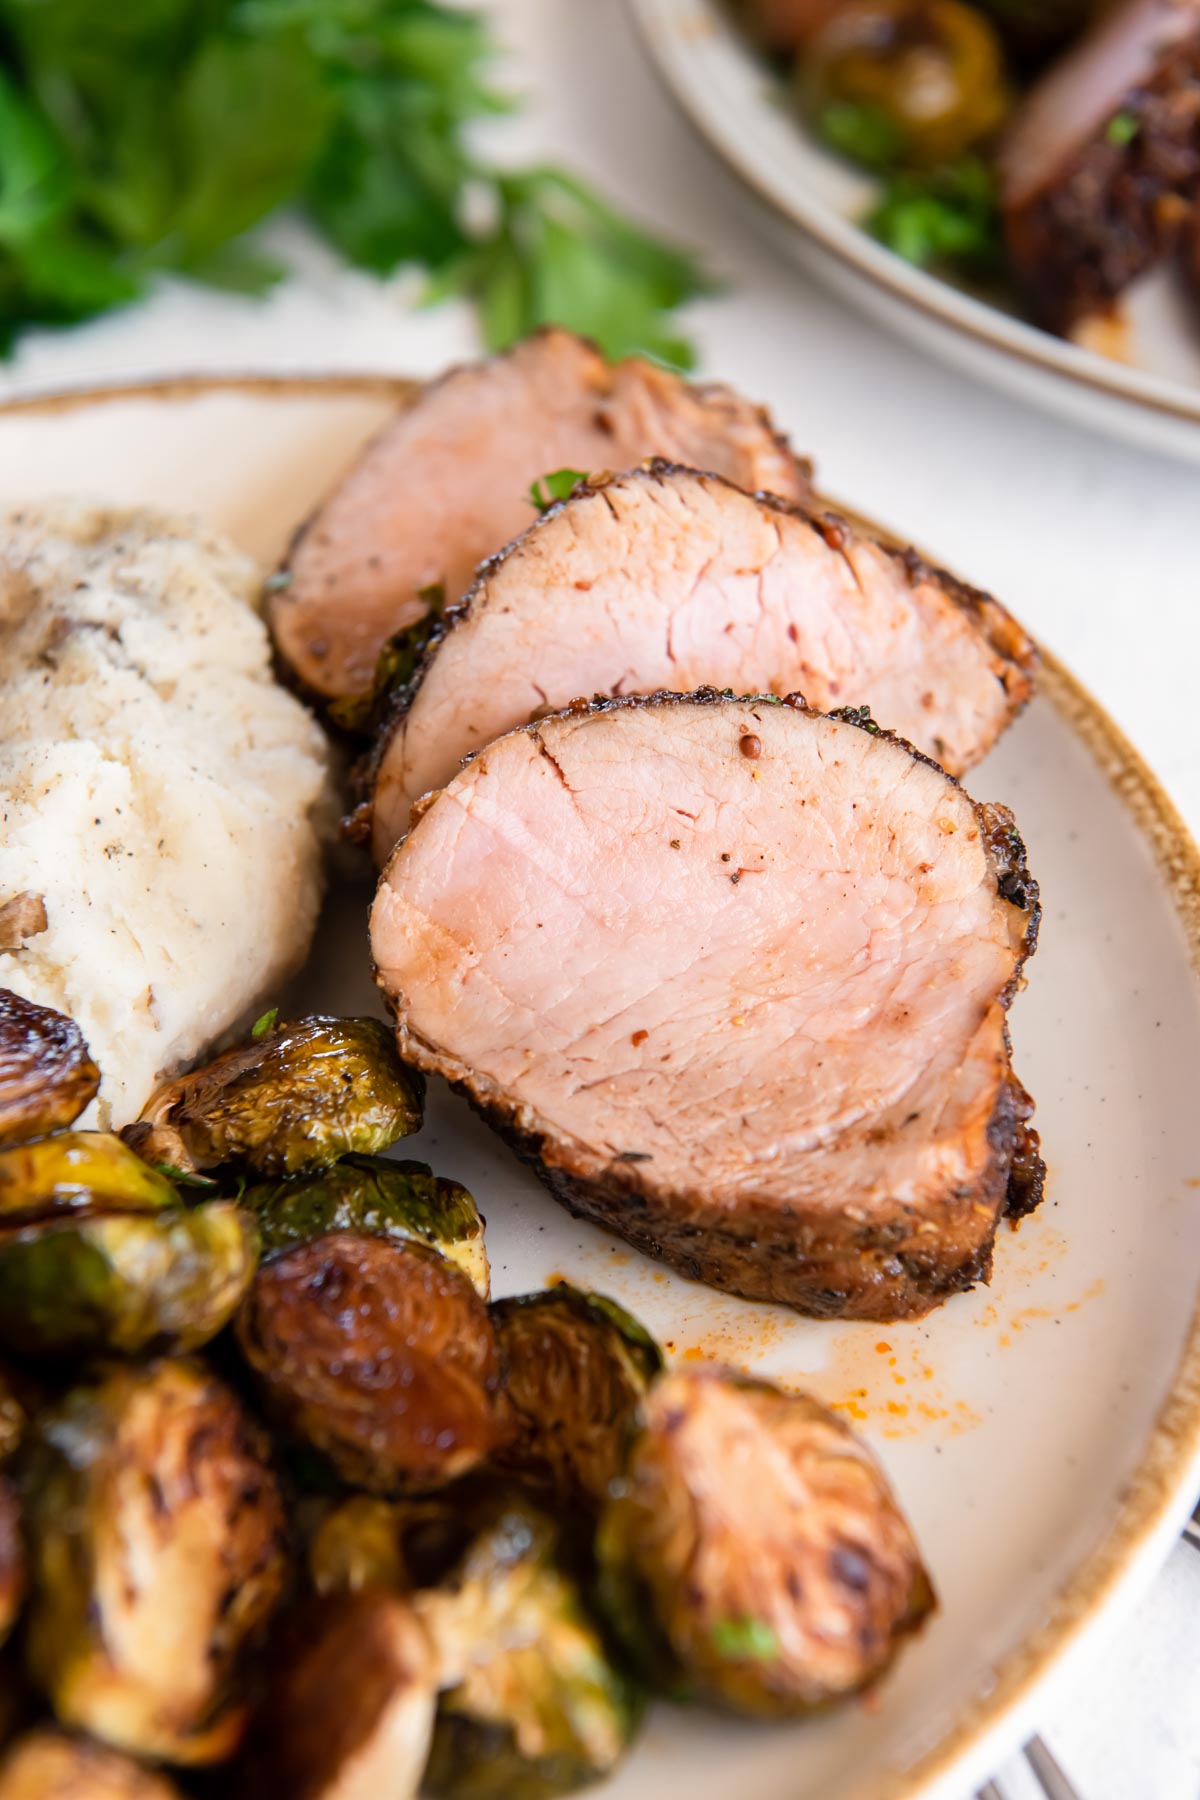 baked pork tenderloin served with mashed potatoes and brussels sprouts